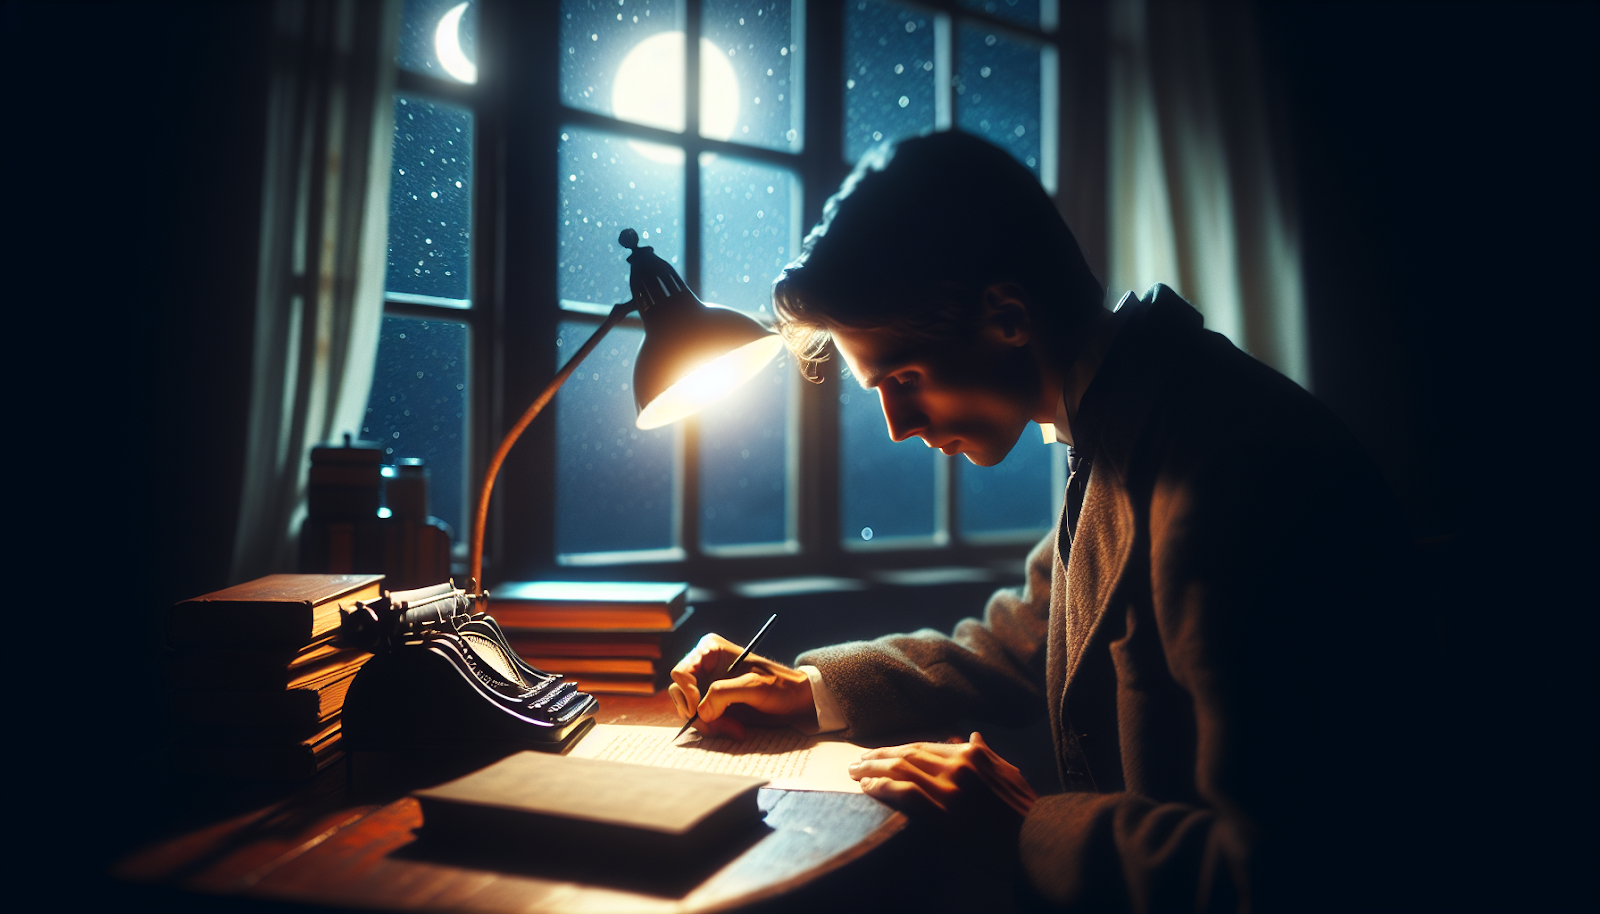 A person writing a letter as part of crafting a personalized AA amends script